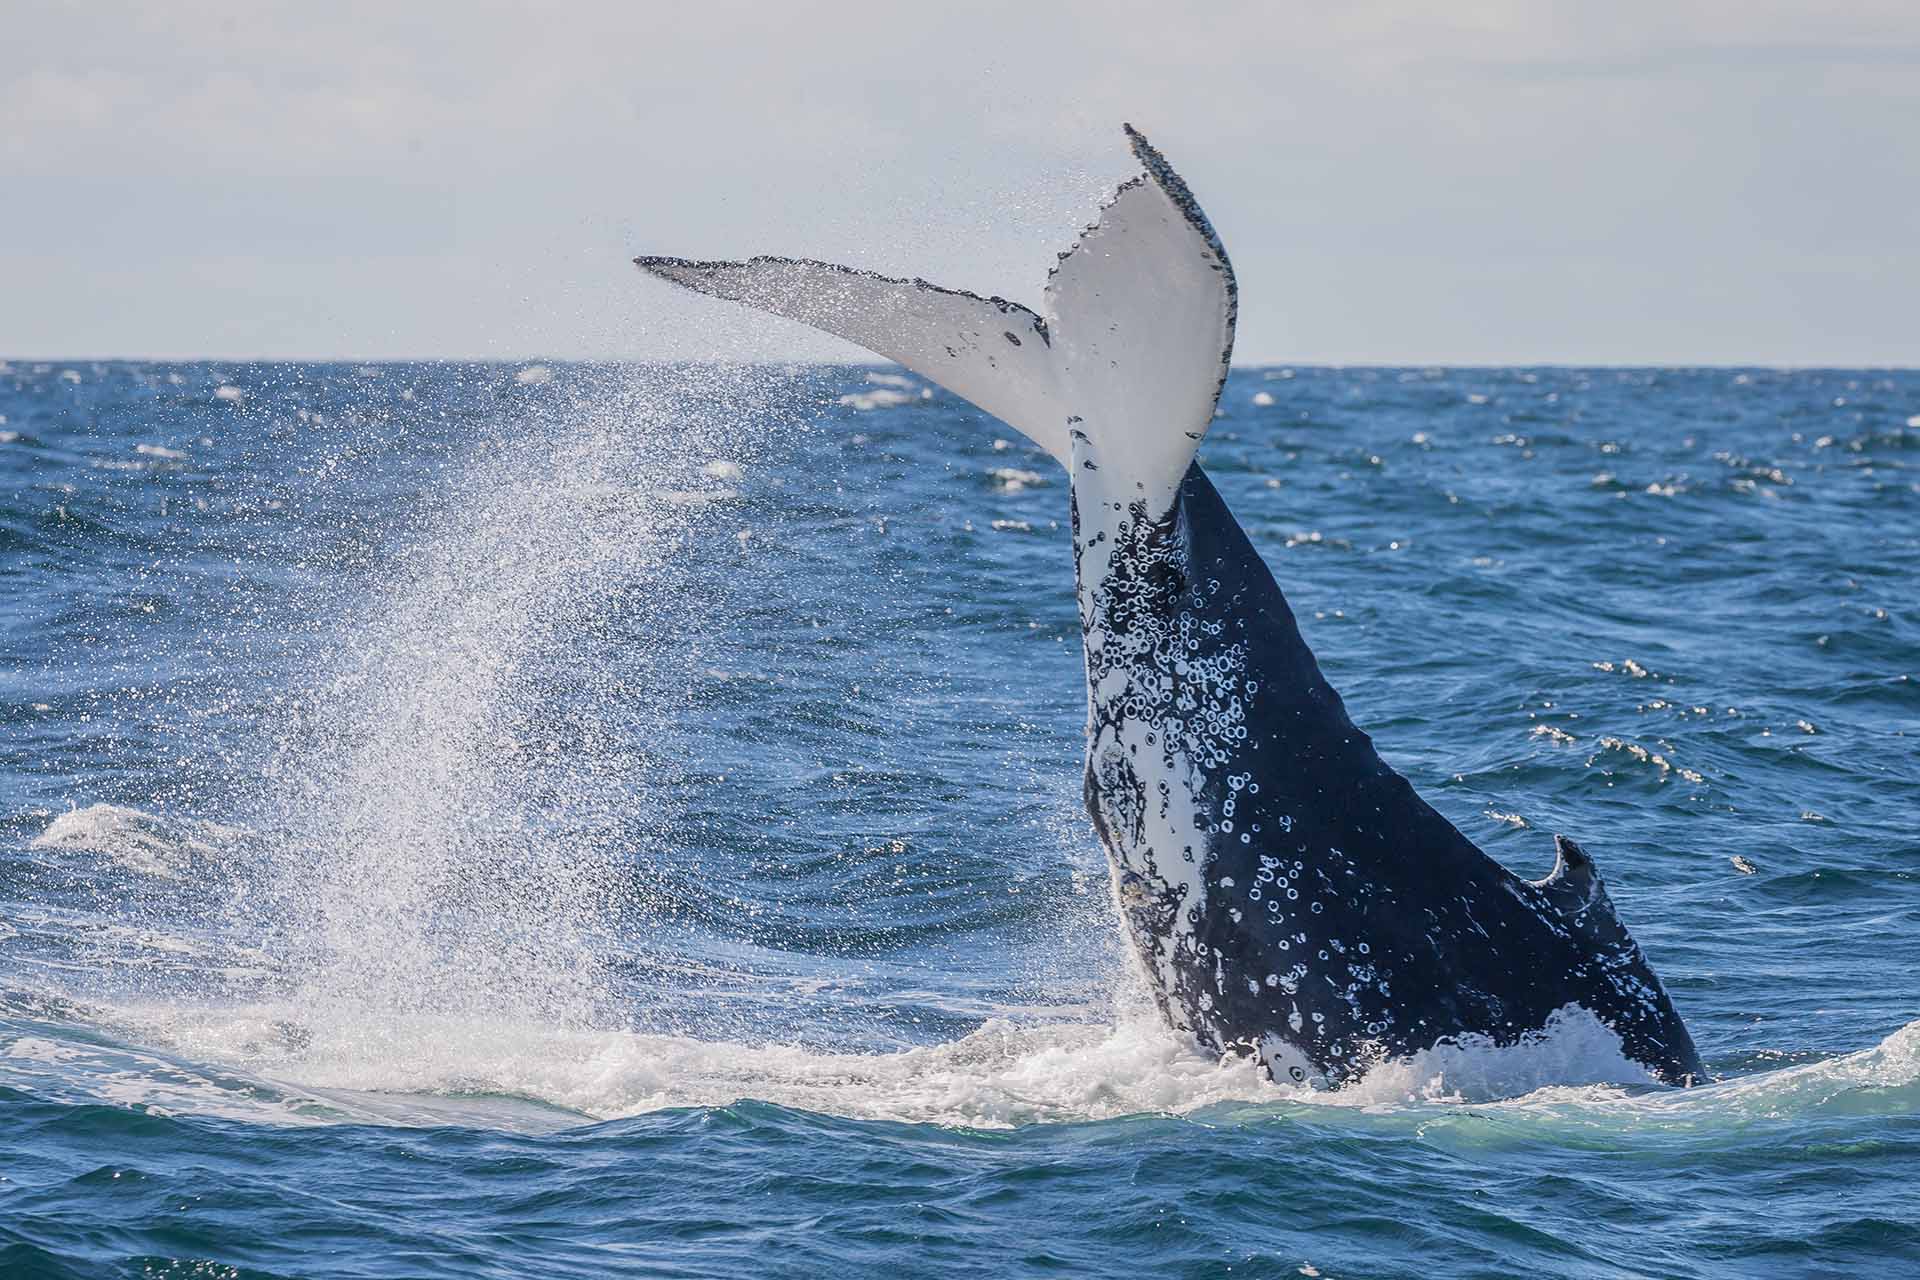 Whales, Humpback whales, whale watching, behaviour, moves, NSW, migration, south coast, tail slap, tail slapping, whale tail